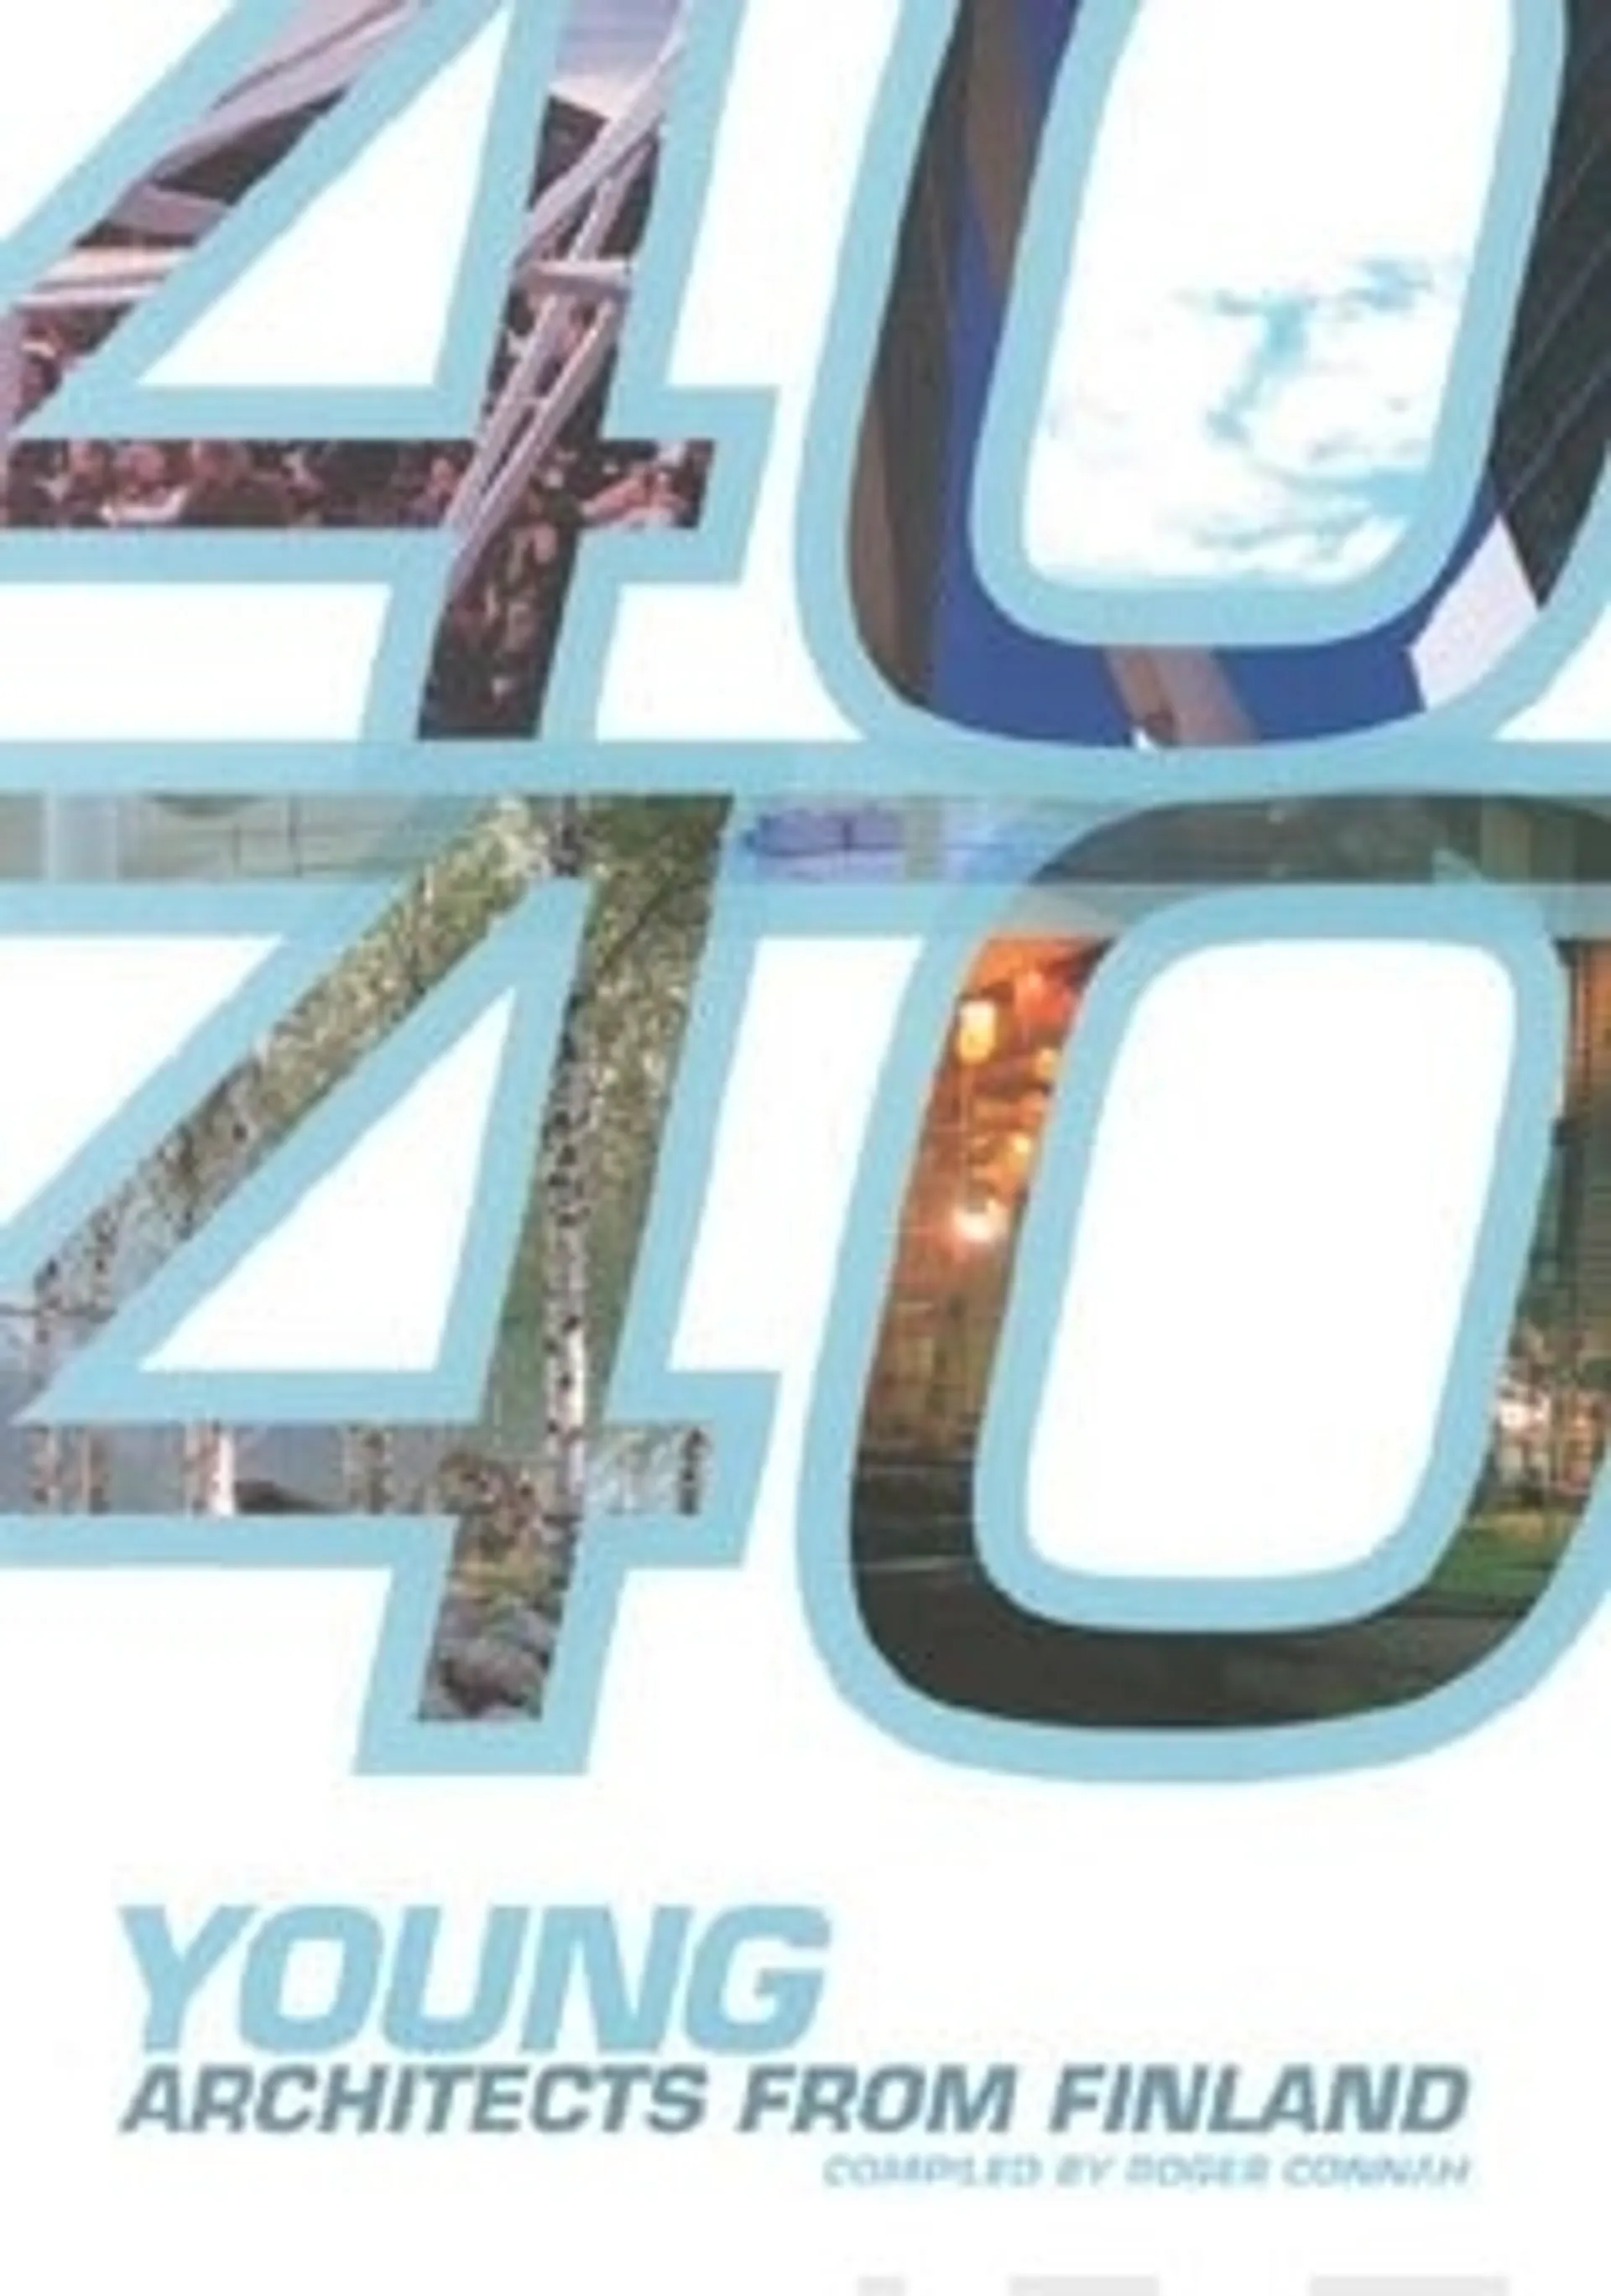 40/40 young architects from Finland